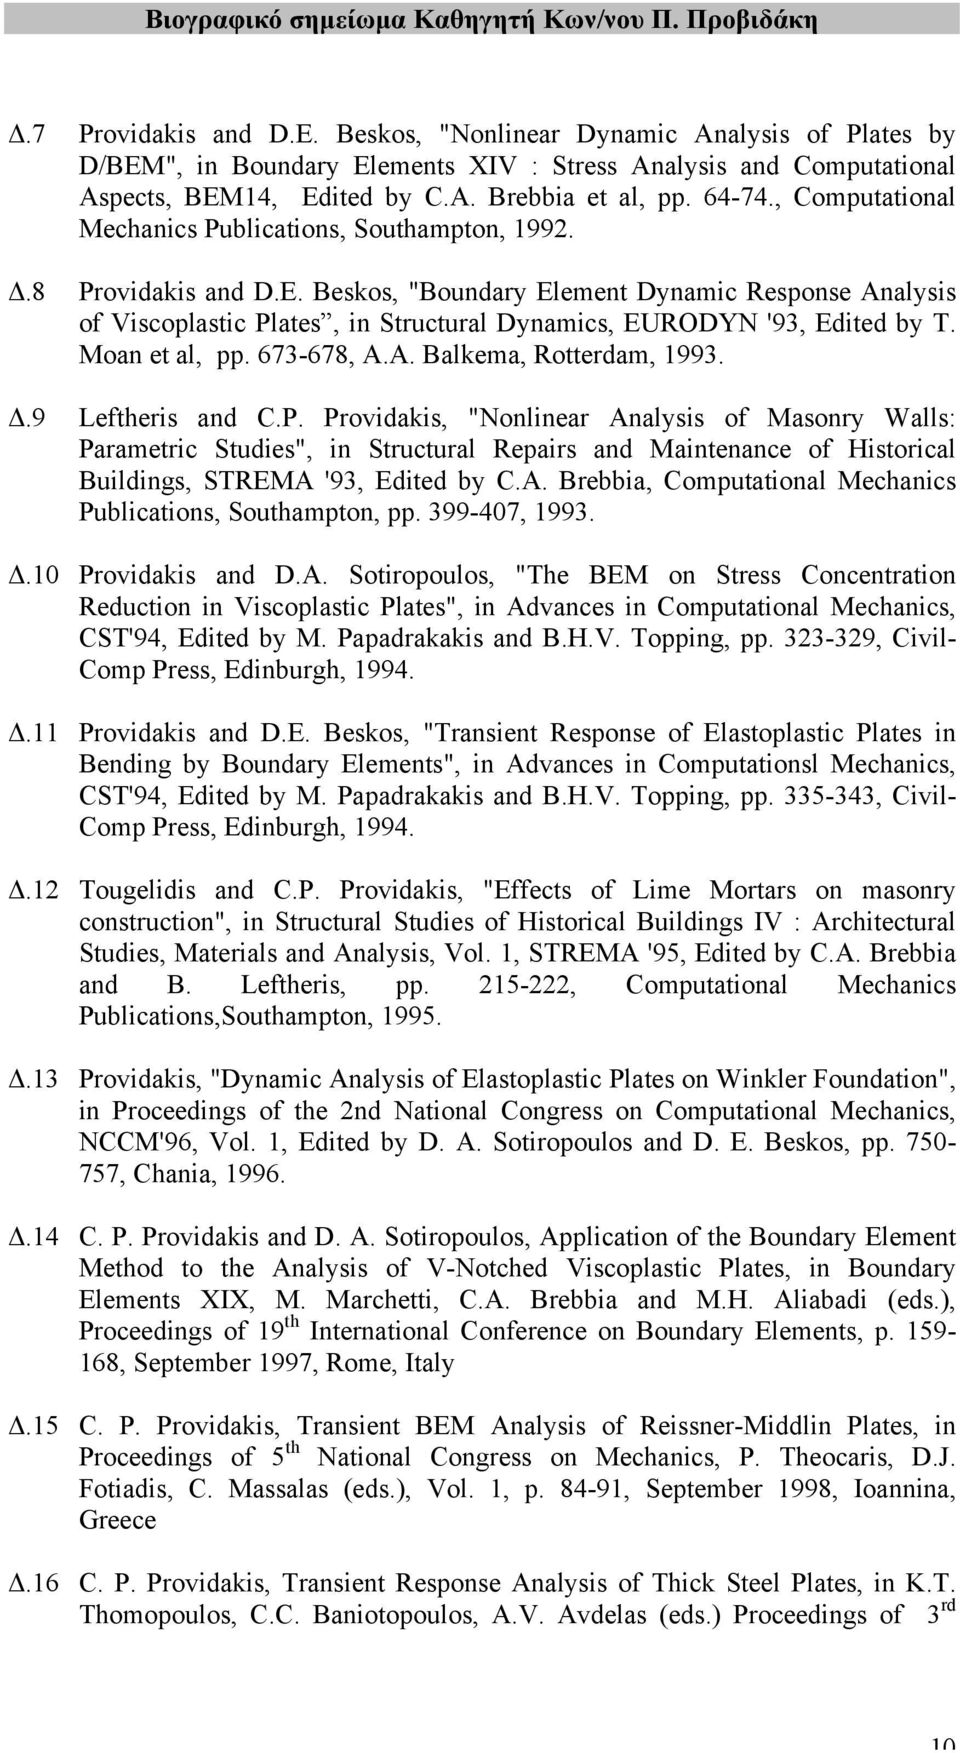 Beskos, "Boundary Element Dynamic Response Analysis of Viscoplastic Plates, in Structural Dynamics, EURODYN '93, Edited by T. Moan et al, pp. 673-678, A.A. Balkema, Rotterdam, 1993. Δ.